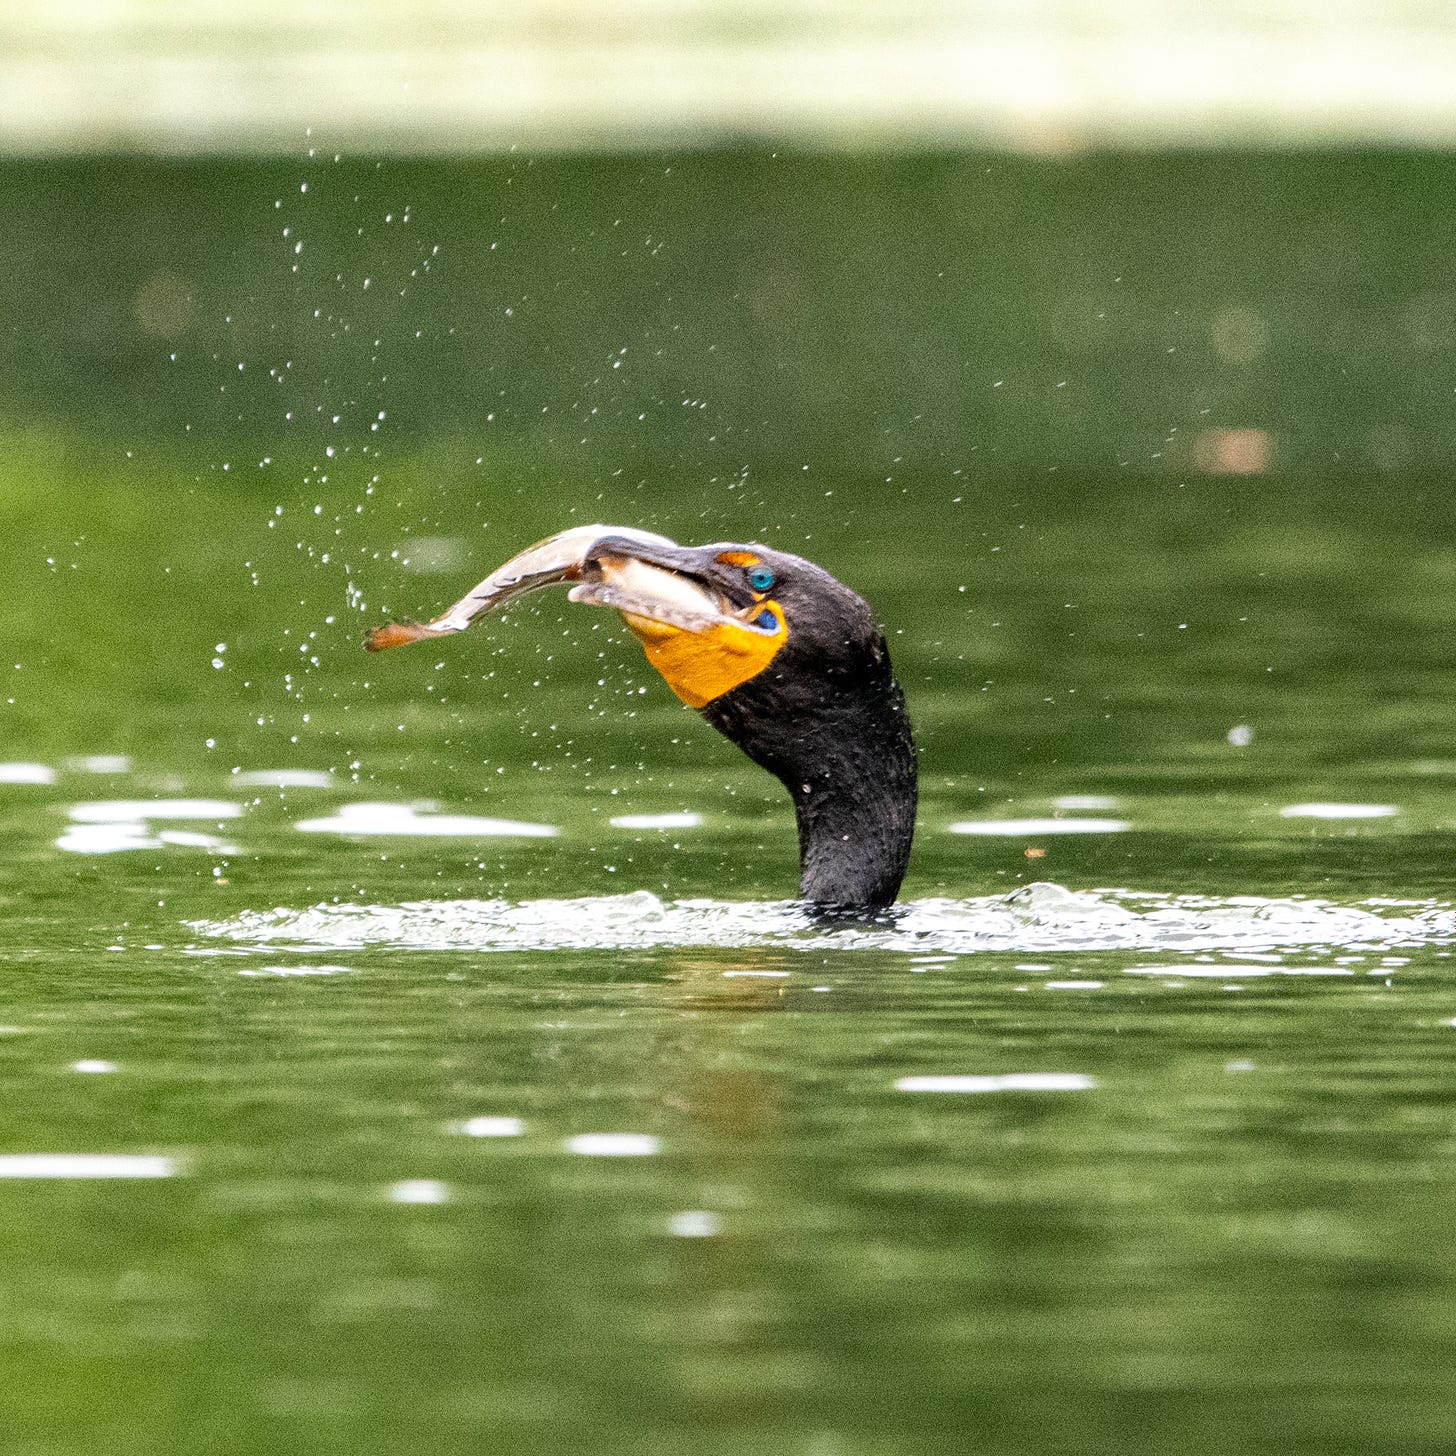 The head and neck of an aquamarine-eyed double-crested cormorant juts out of lakewater, spray dotting the air as the cormorant wrestles down its gullet a still-struggling fish